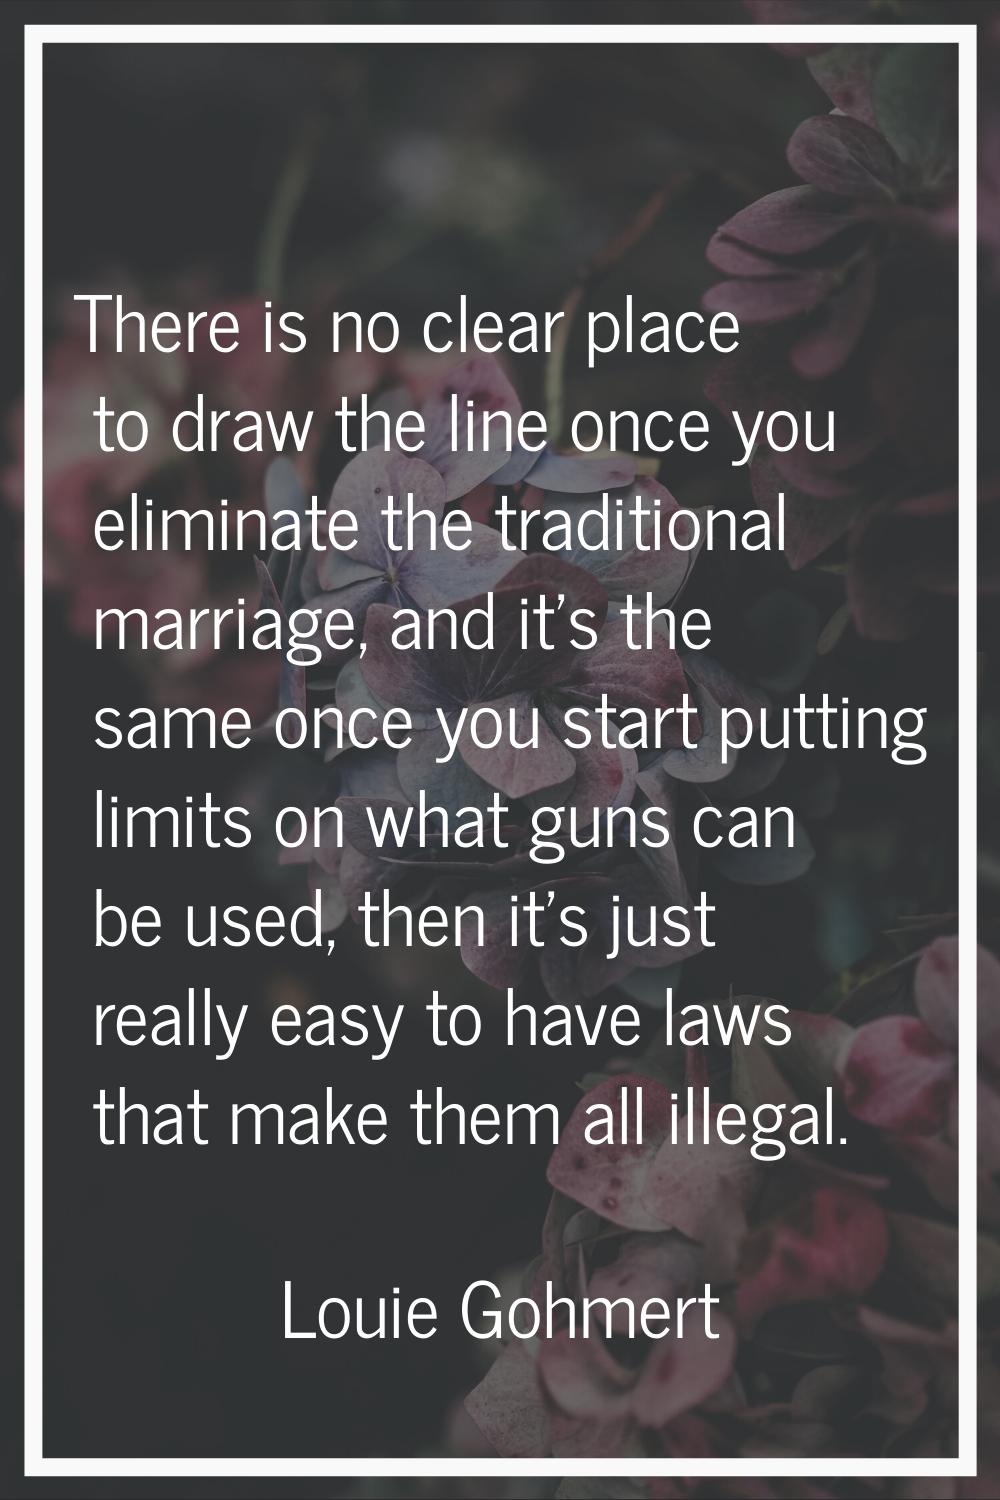 There is no clear place to draw the line once you eliminate the traditional marriage, and it's the 